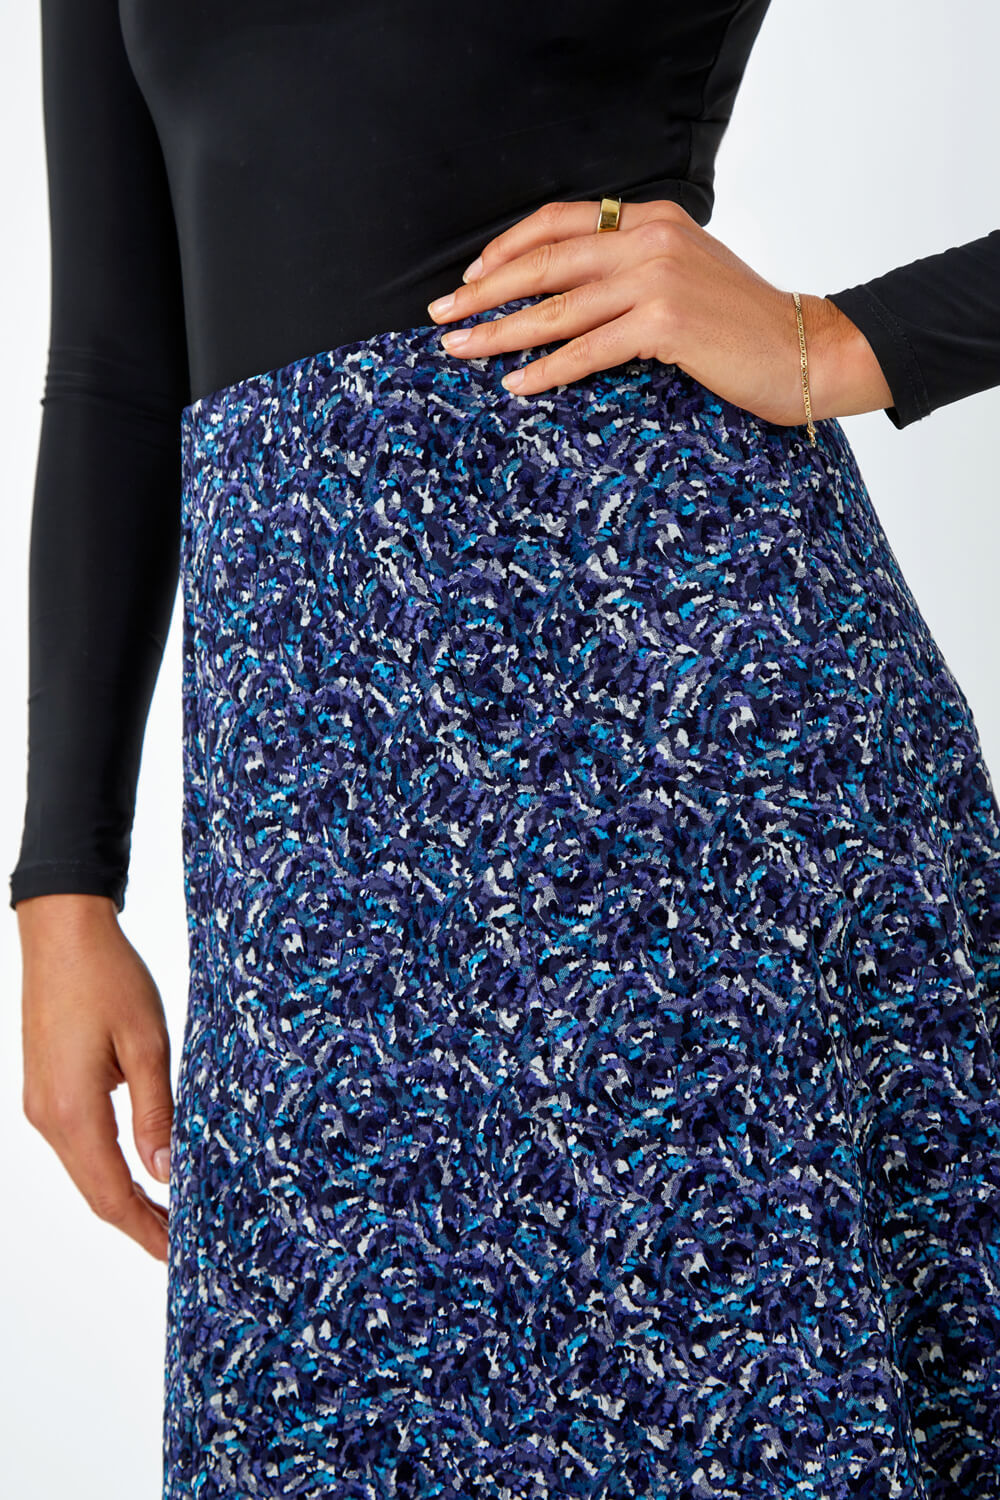 Midnight Blue Textured Abstract Print A-Line Stretch Skirt, Image 5 of 5